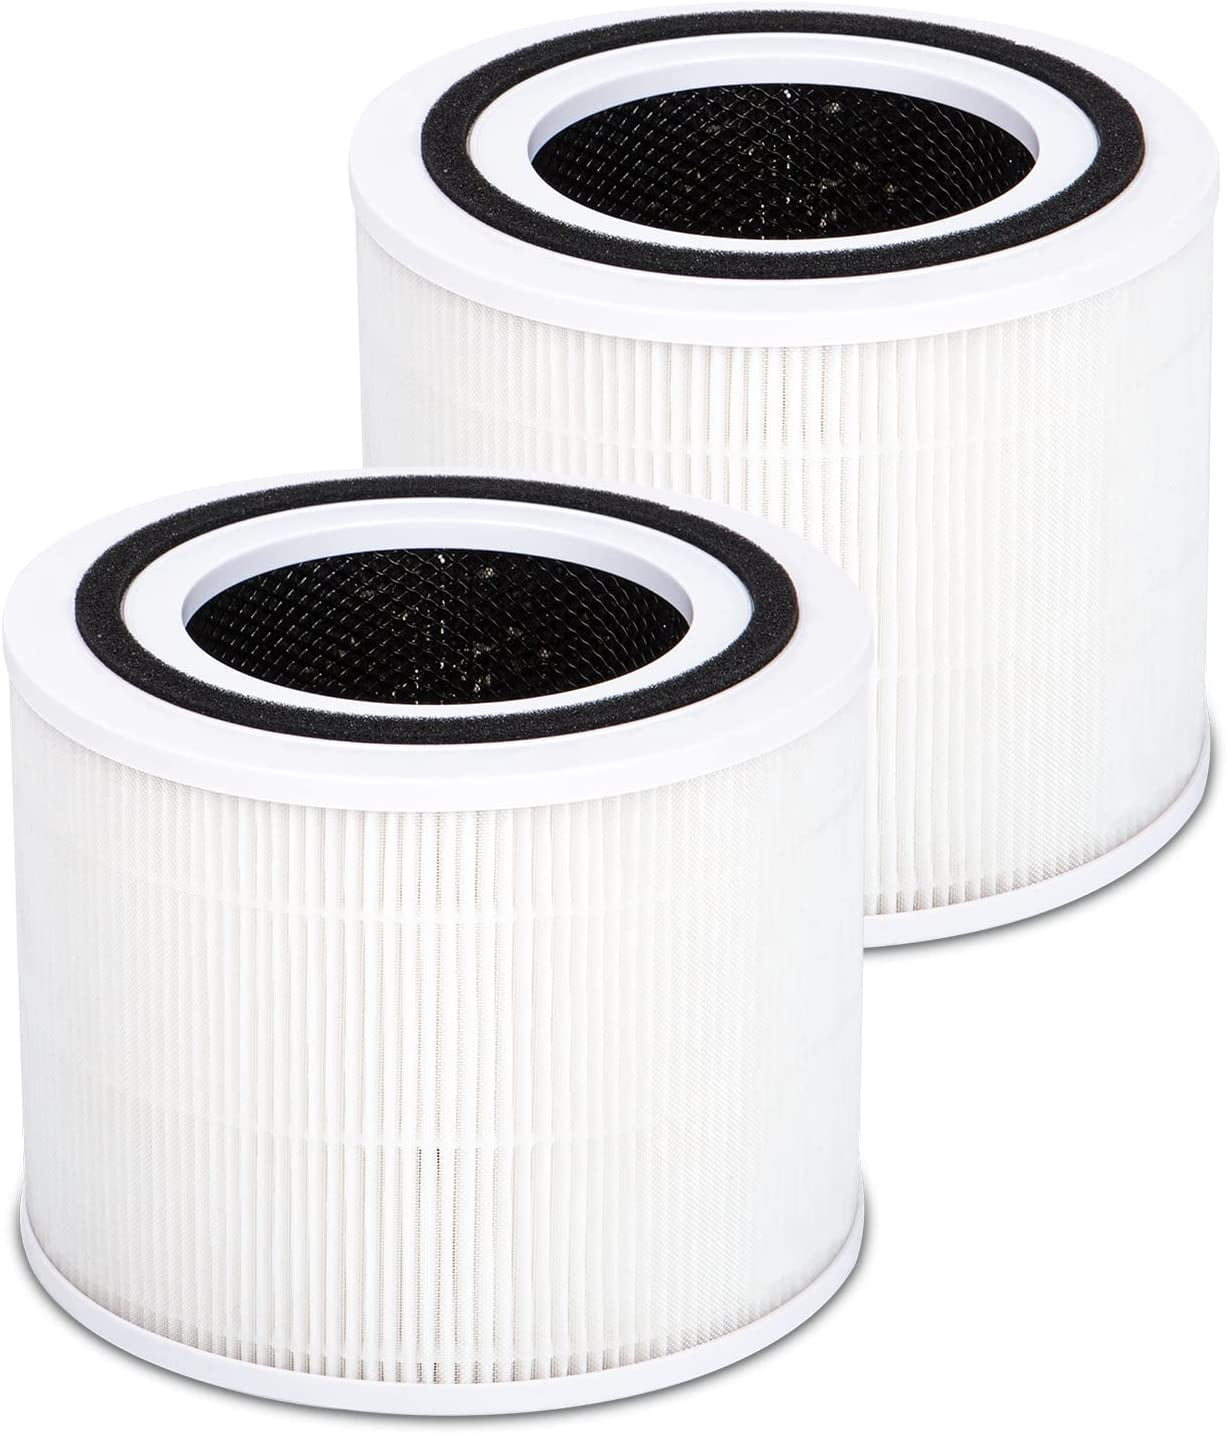 2 Pack Core 300 Replacement Filter Compatible with LEVOIT Core 300 and Core  300S Air Purifier, 3-in-1 H13 True HEPA Filter, High-Efficiency Activated  Carbon - Compared to Part # Core 300-RF (White) 